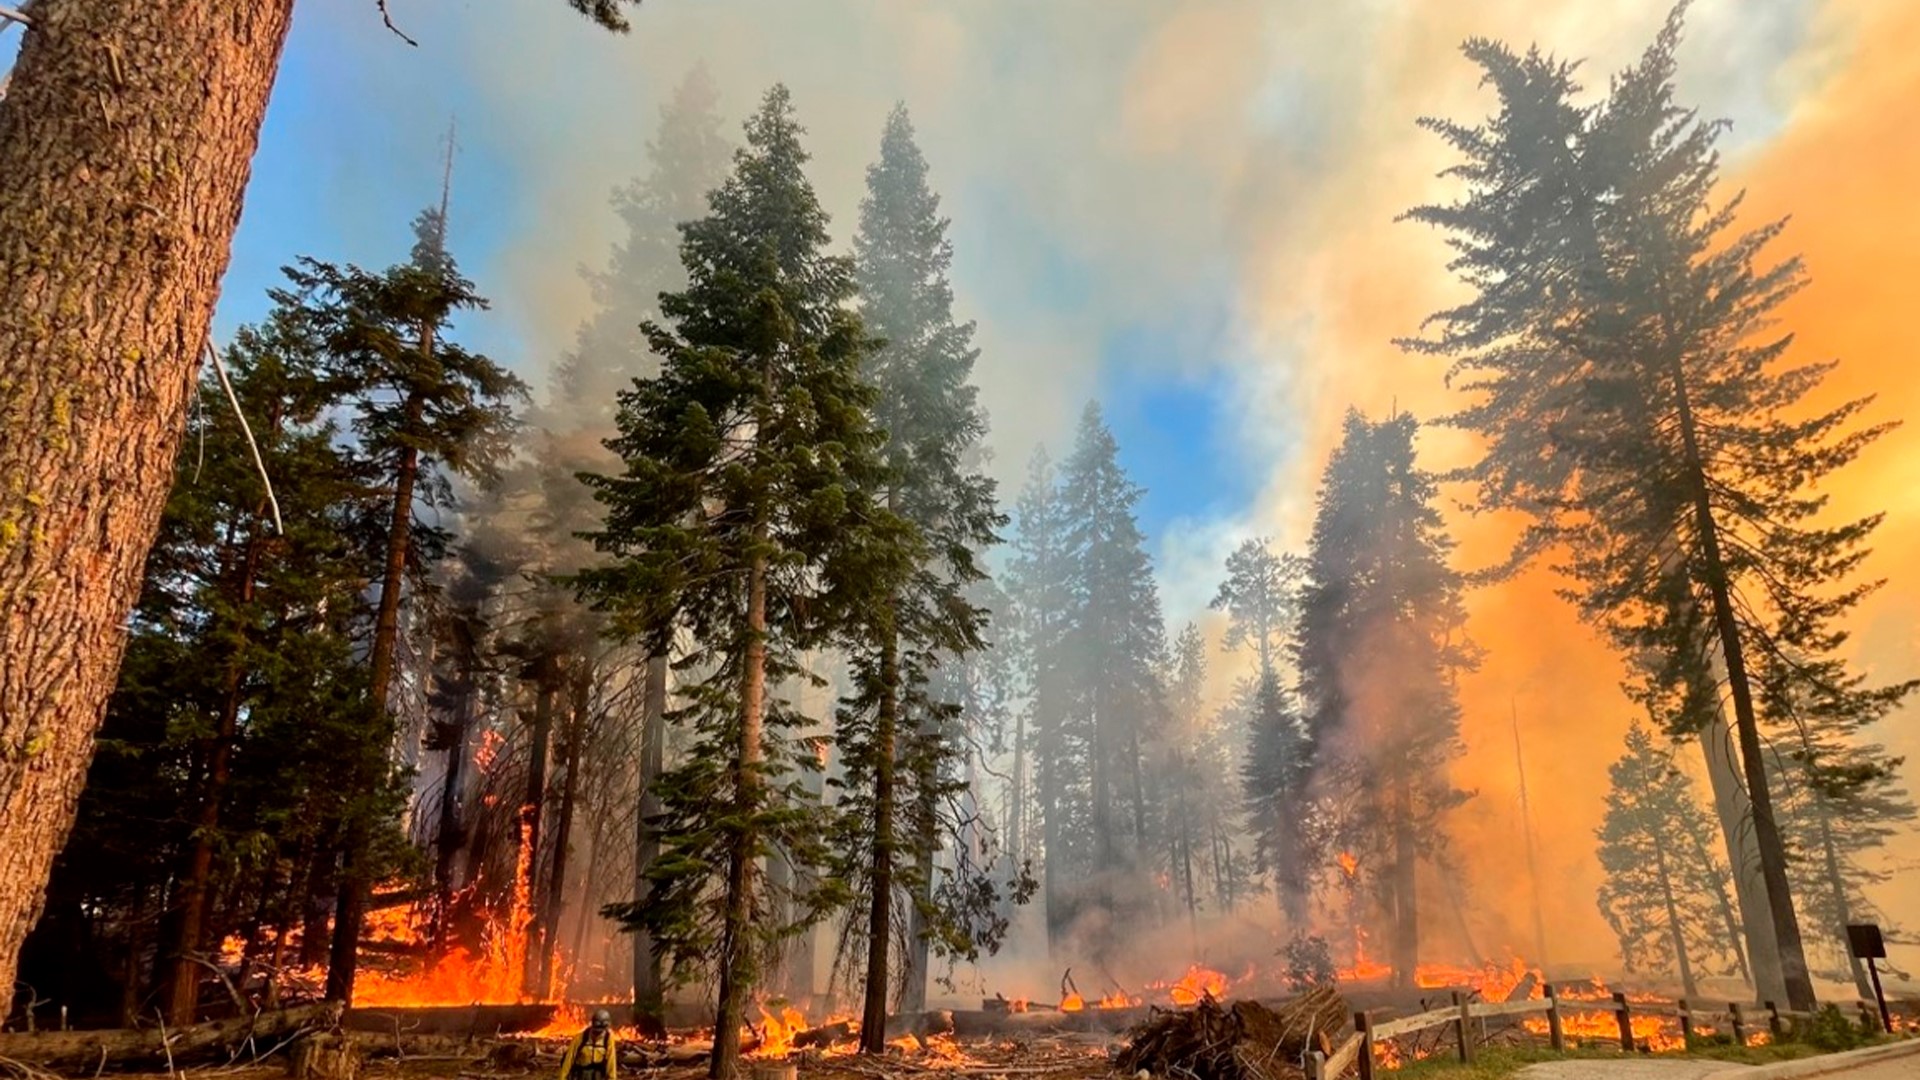 The Washburn Fire was 22% contained and moving away from the largest grove of sequoias in the park. Based on prevailing winds, it was unlikely to return to the grove